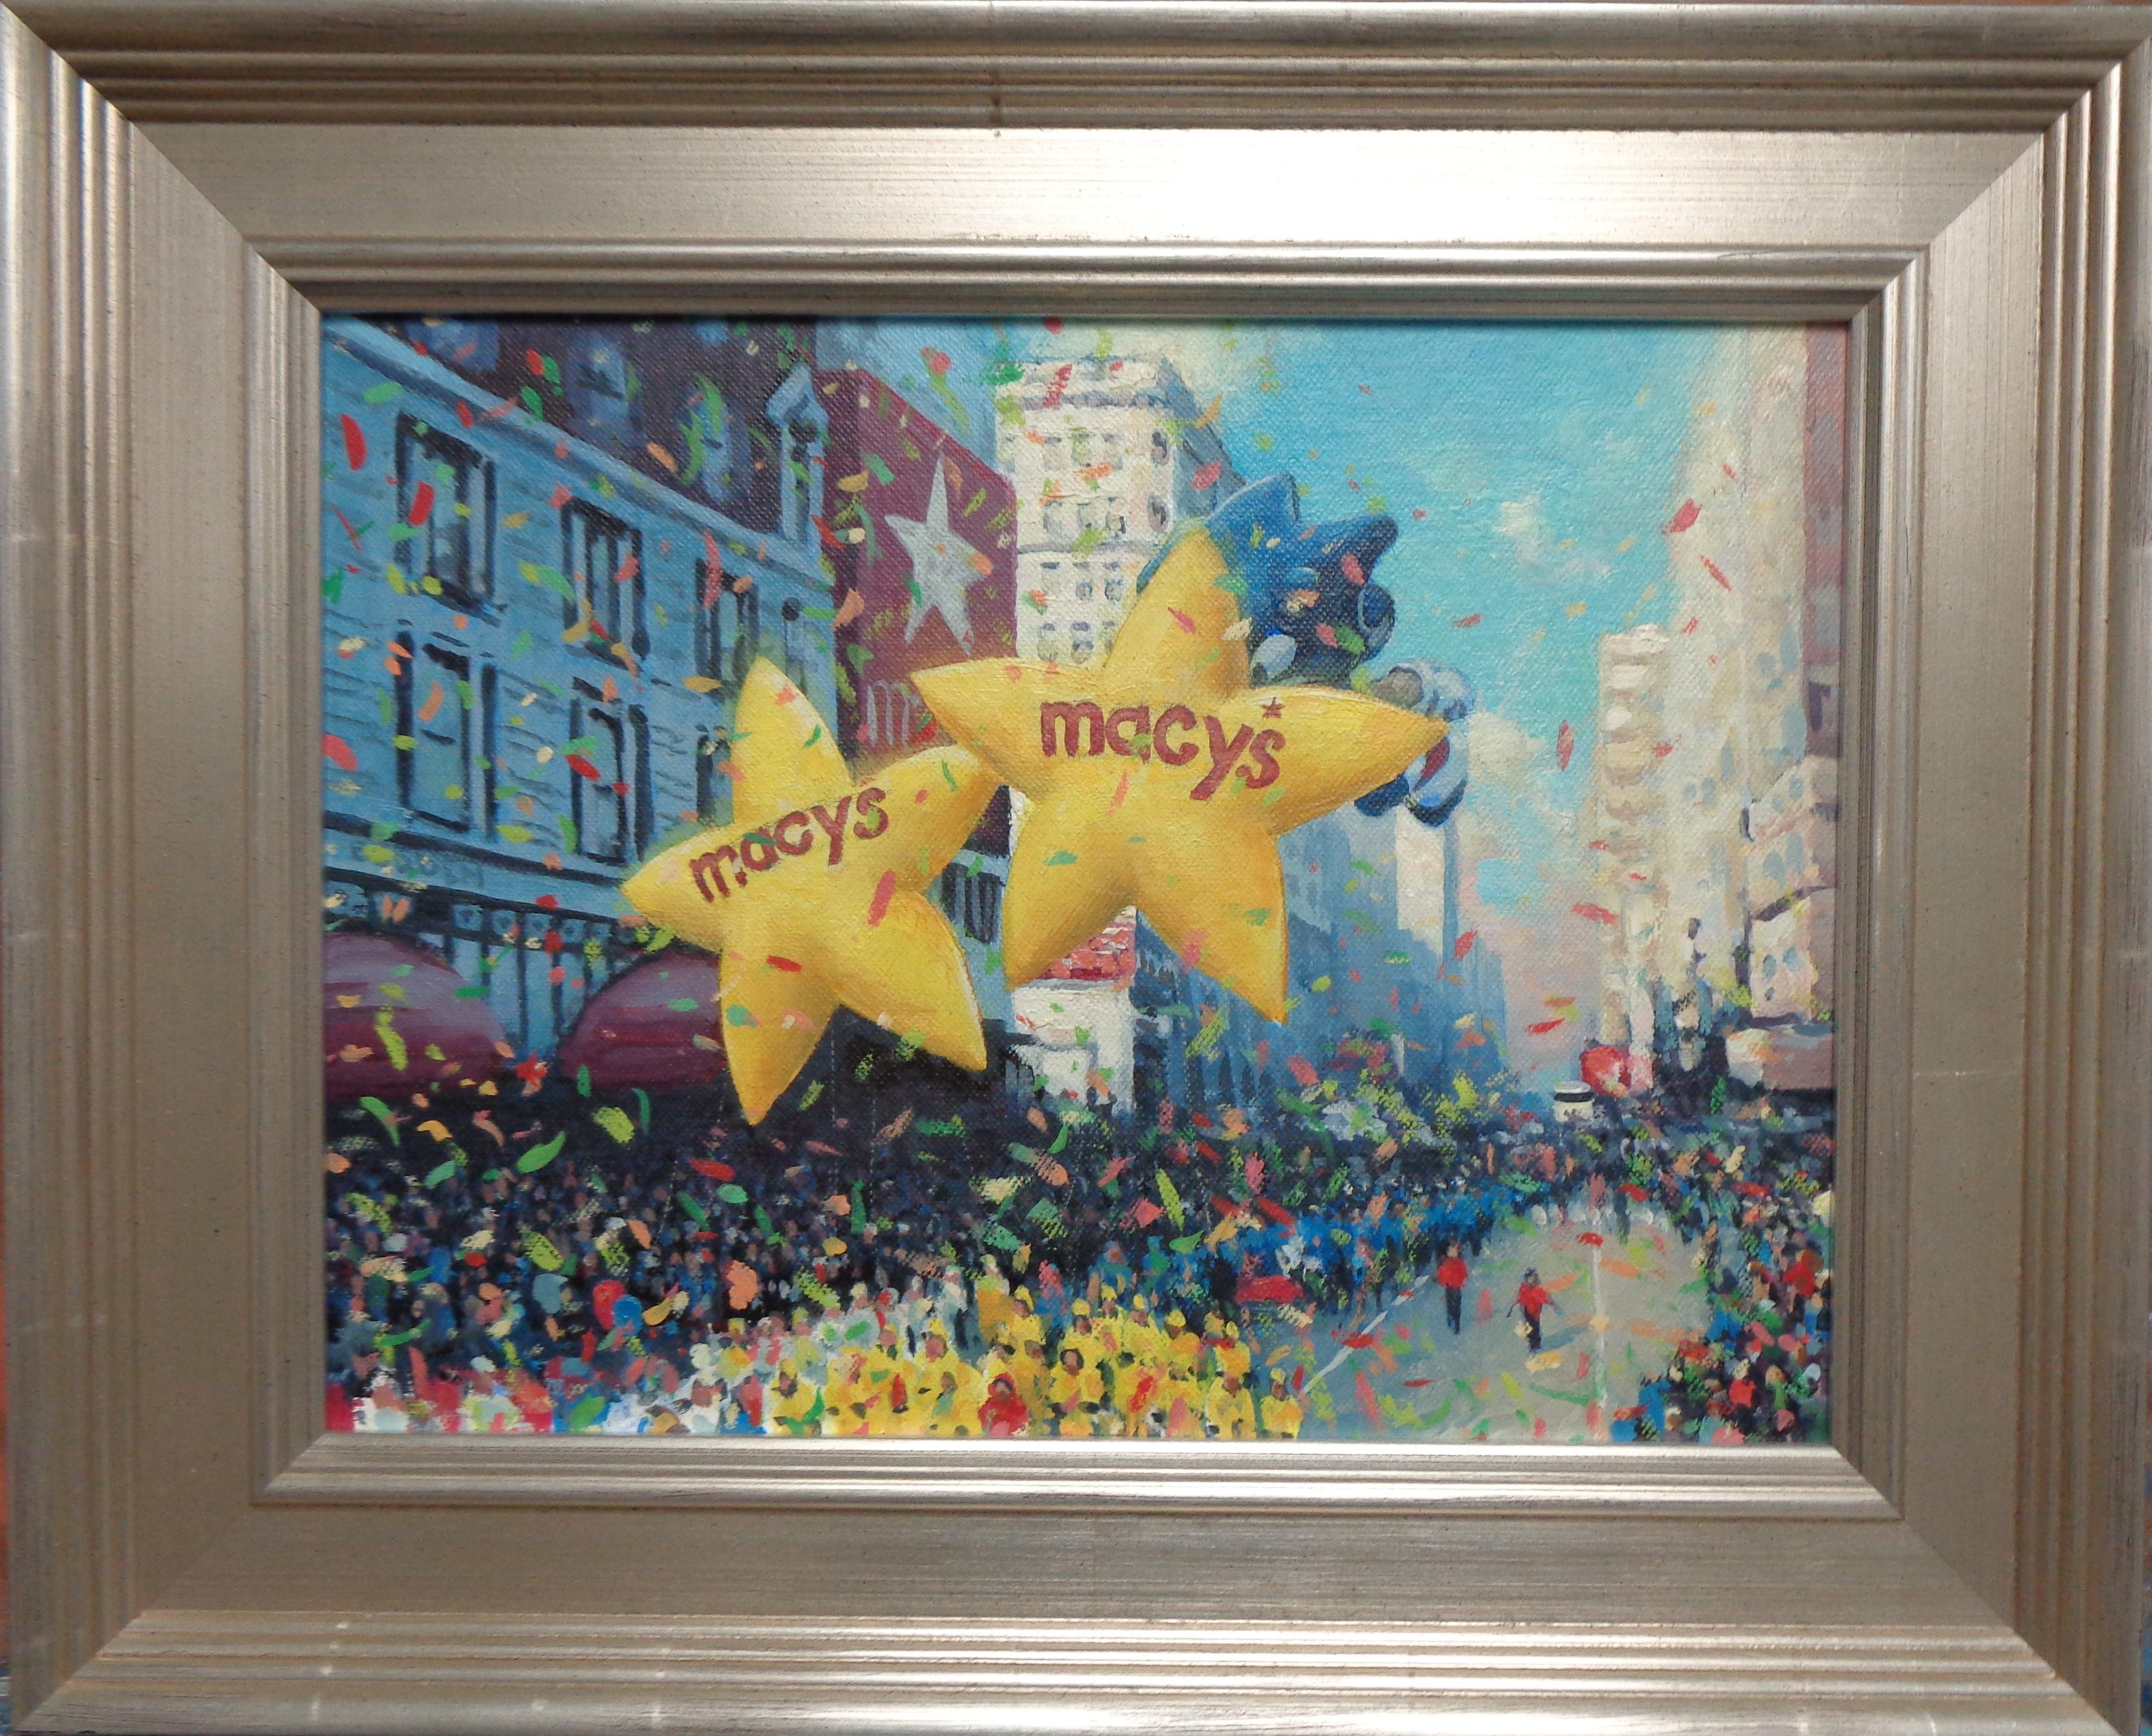 Macy's Star & Sonic II
Part of a series of 11 paintings.
An oil painting on canvas panel by award winning contemporary artist Michael Budden that showcases images from the Macy's Thanksgiving Parade, NYC. The image measures 9 x 12 unframed and 12.75